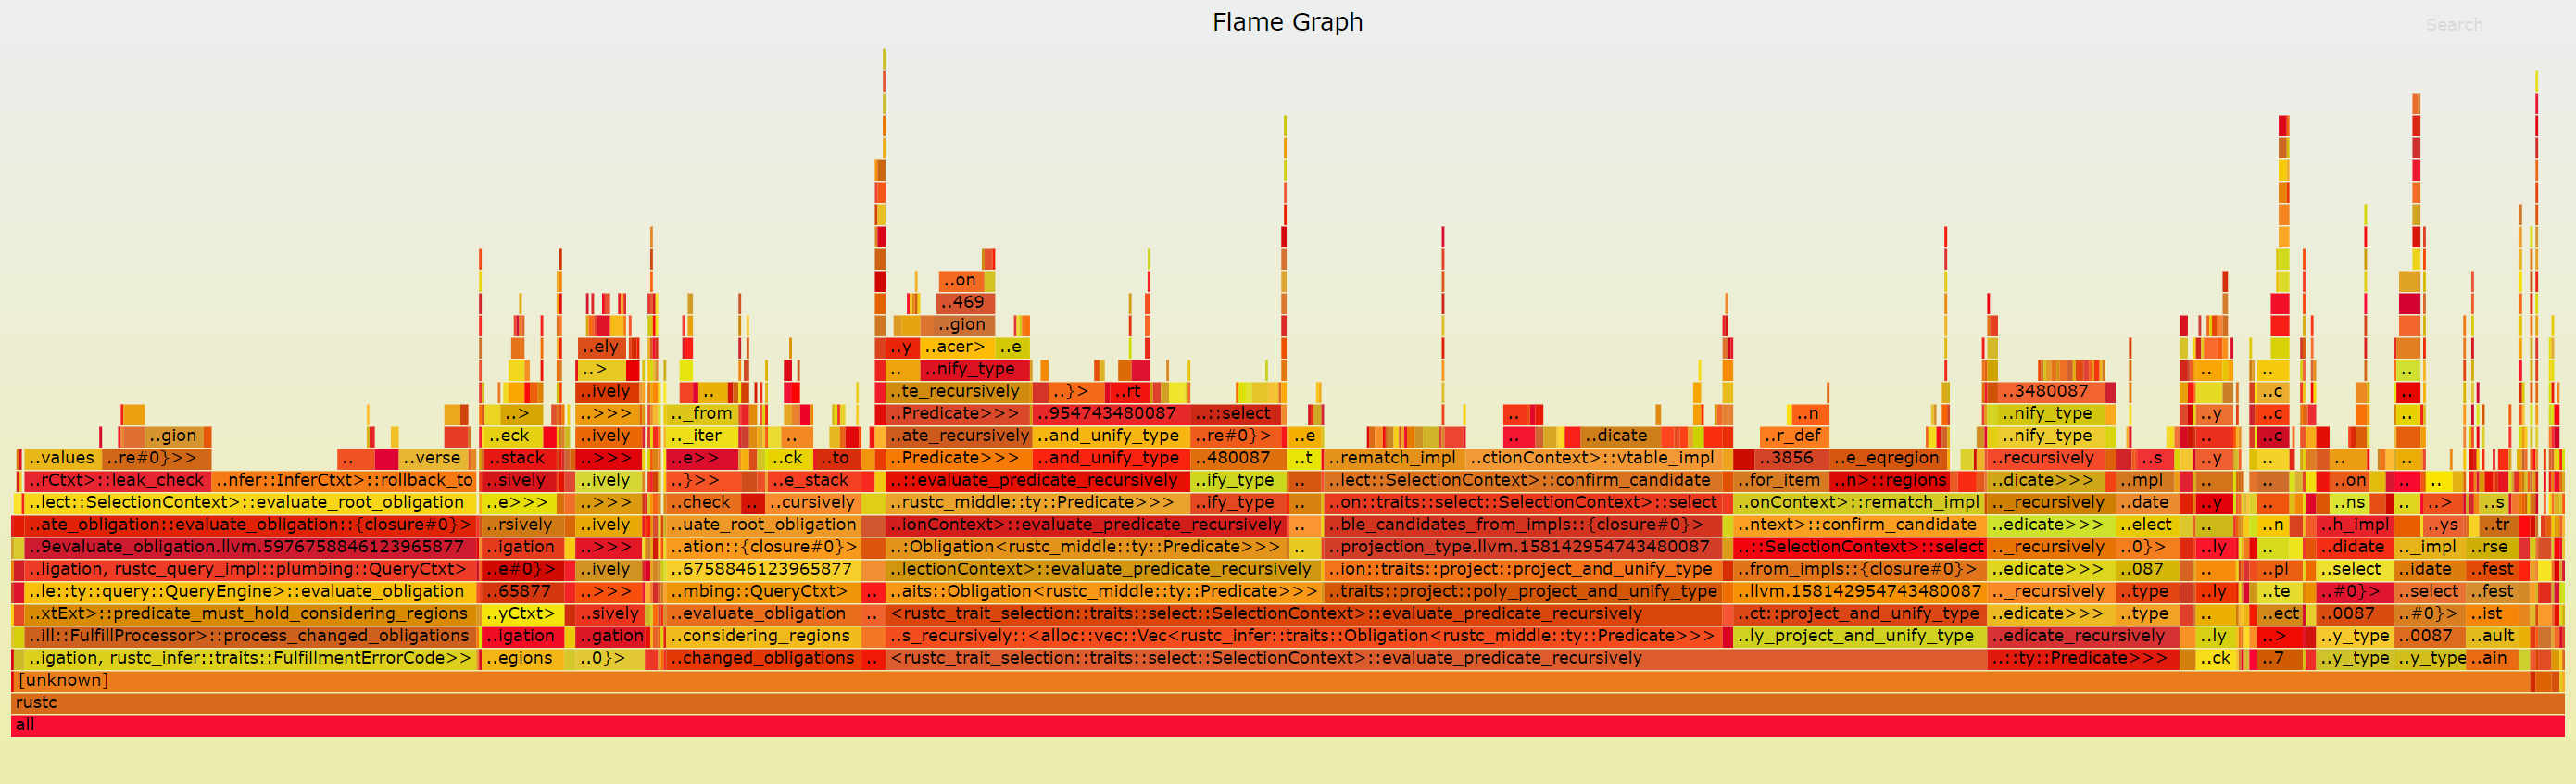 another flamegraph, showing various internal rustc functions